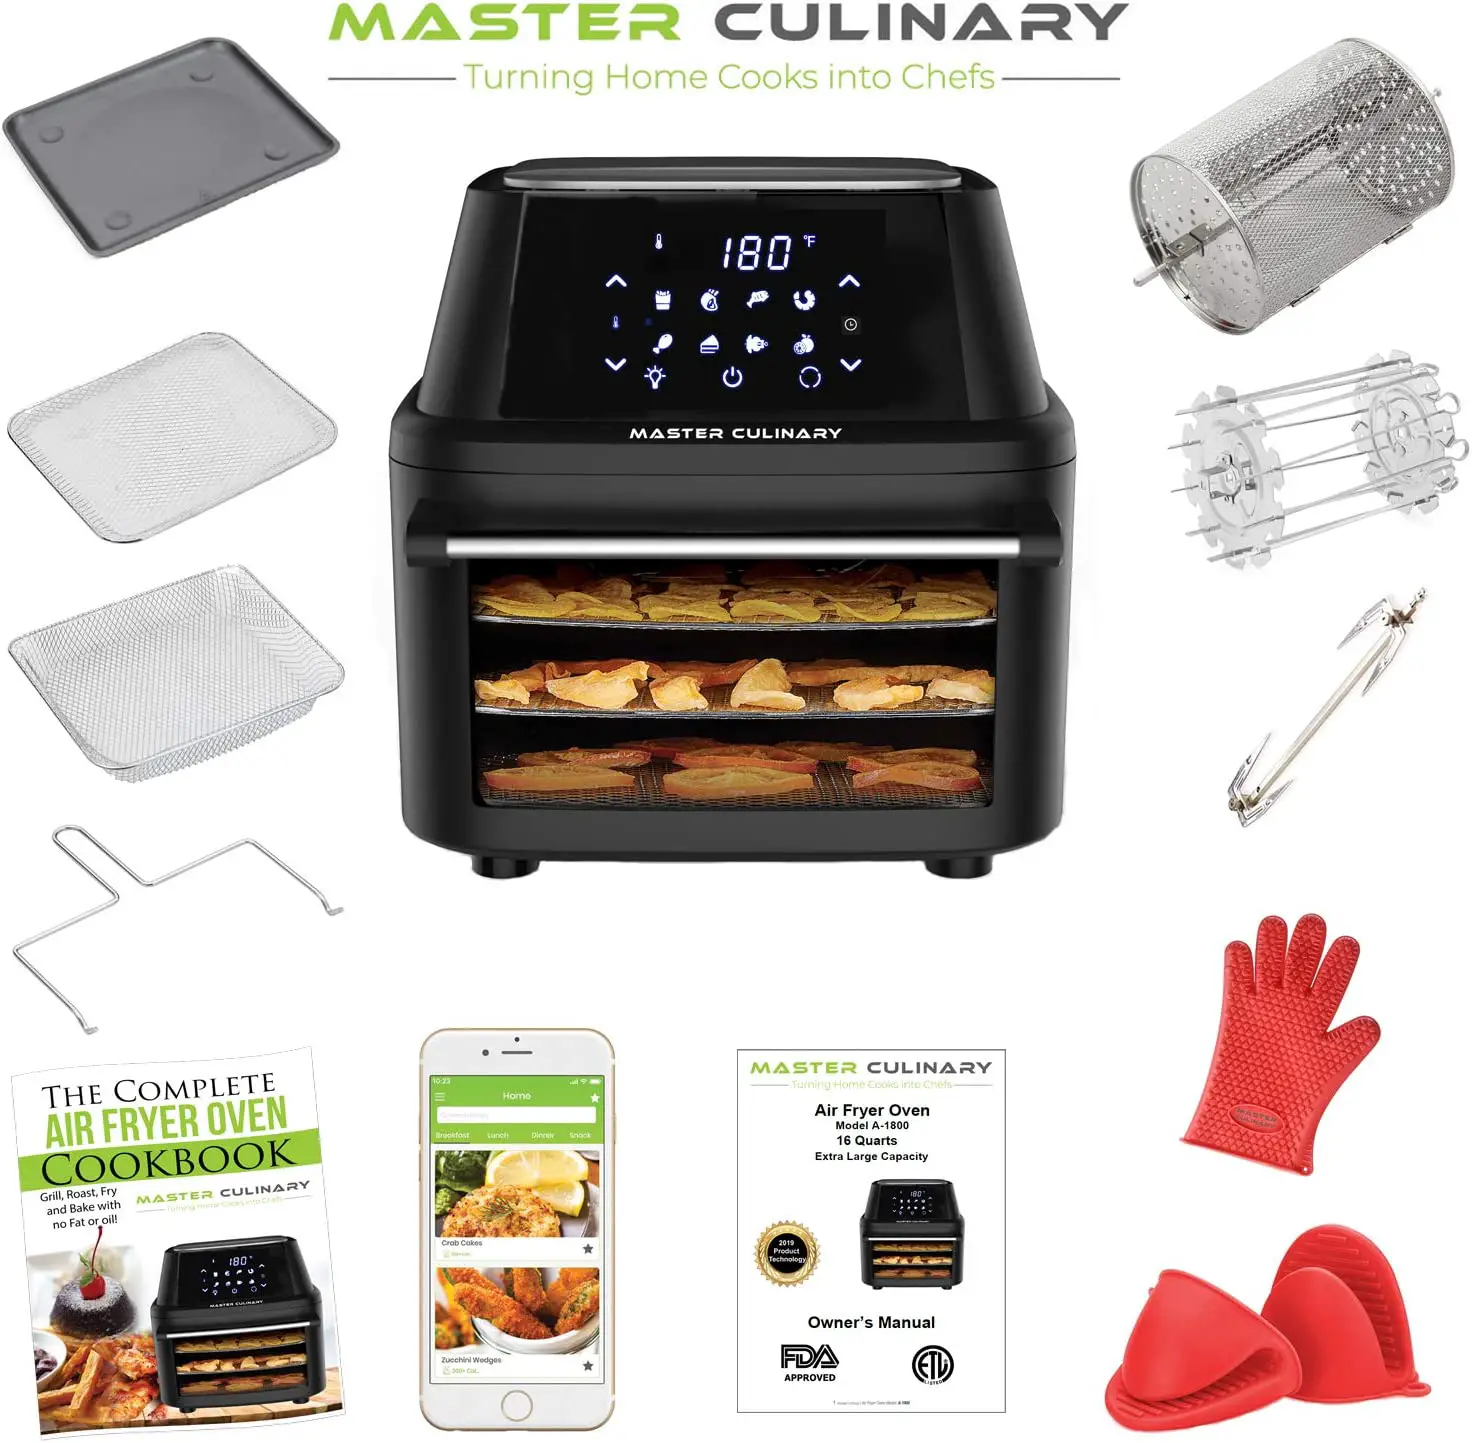 Master Culinary Air Fryer Oven A 1800 16 Quarts Largest In The Market 7 ...